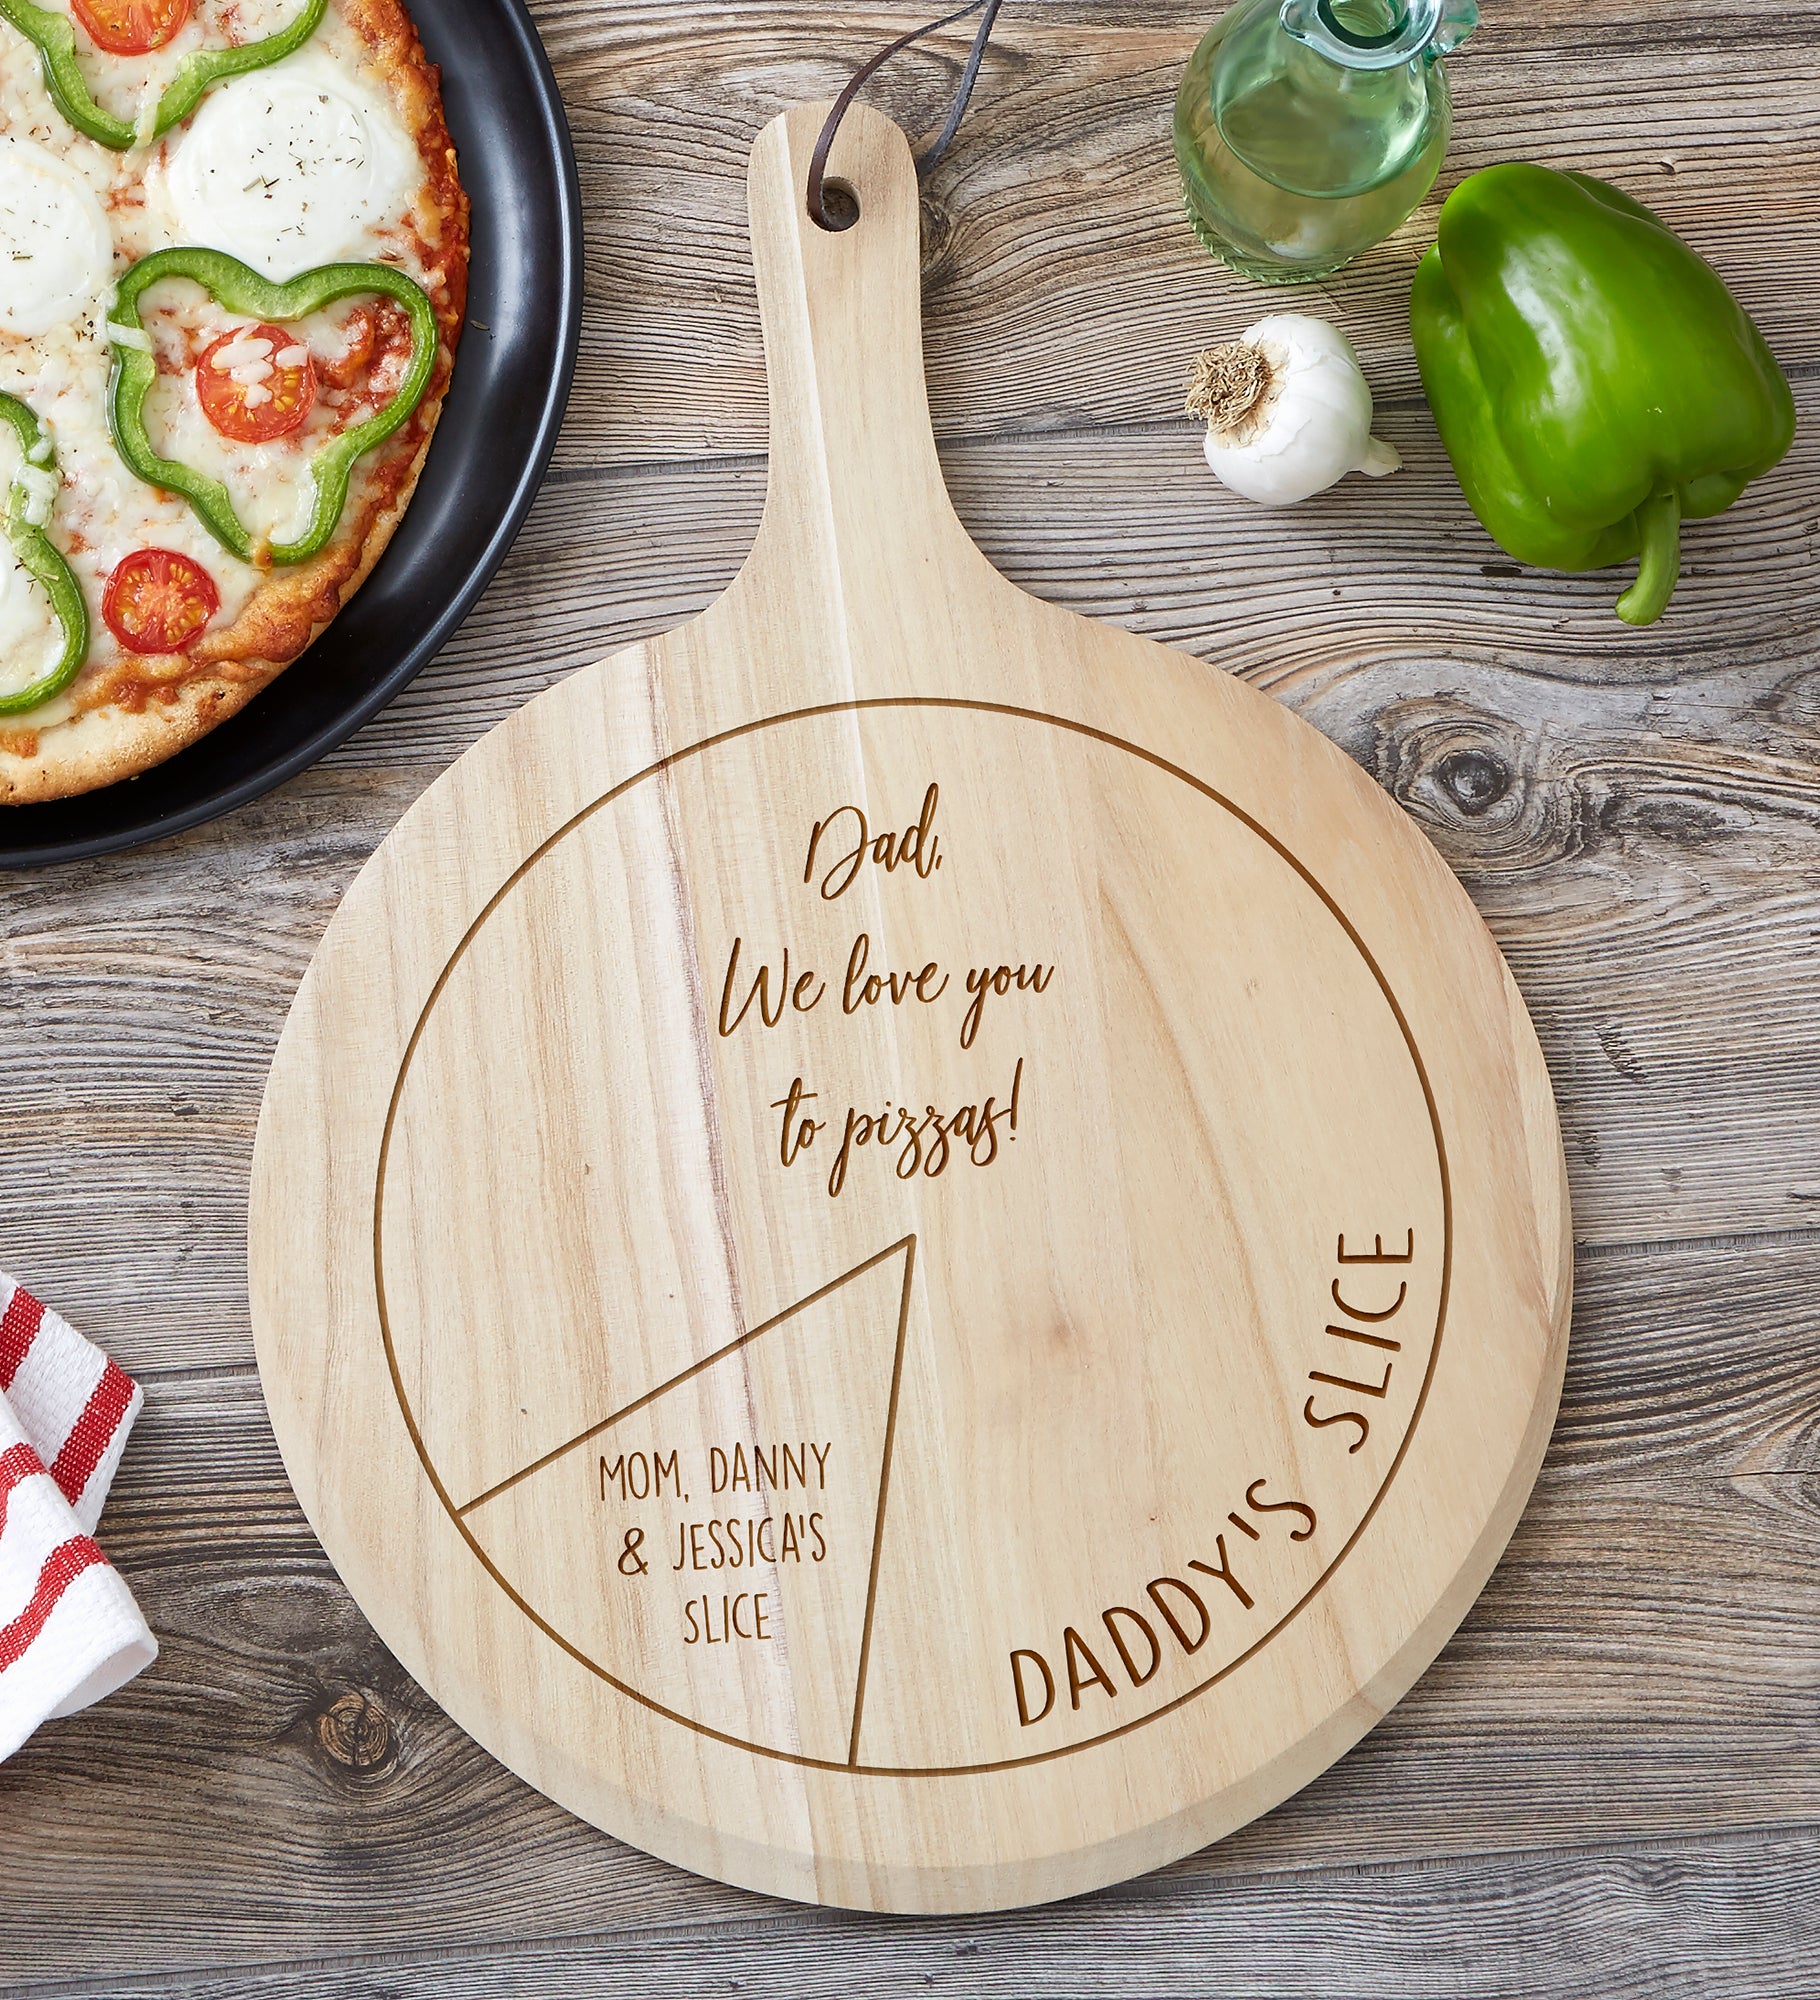 We Love You to Pizzas Personalized 2 Piece Pizza Board Gift Set